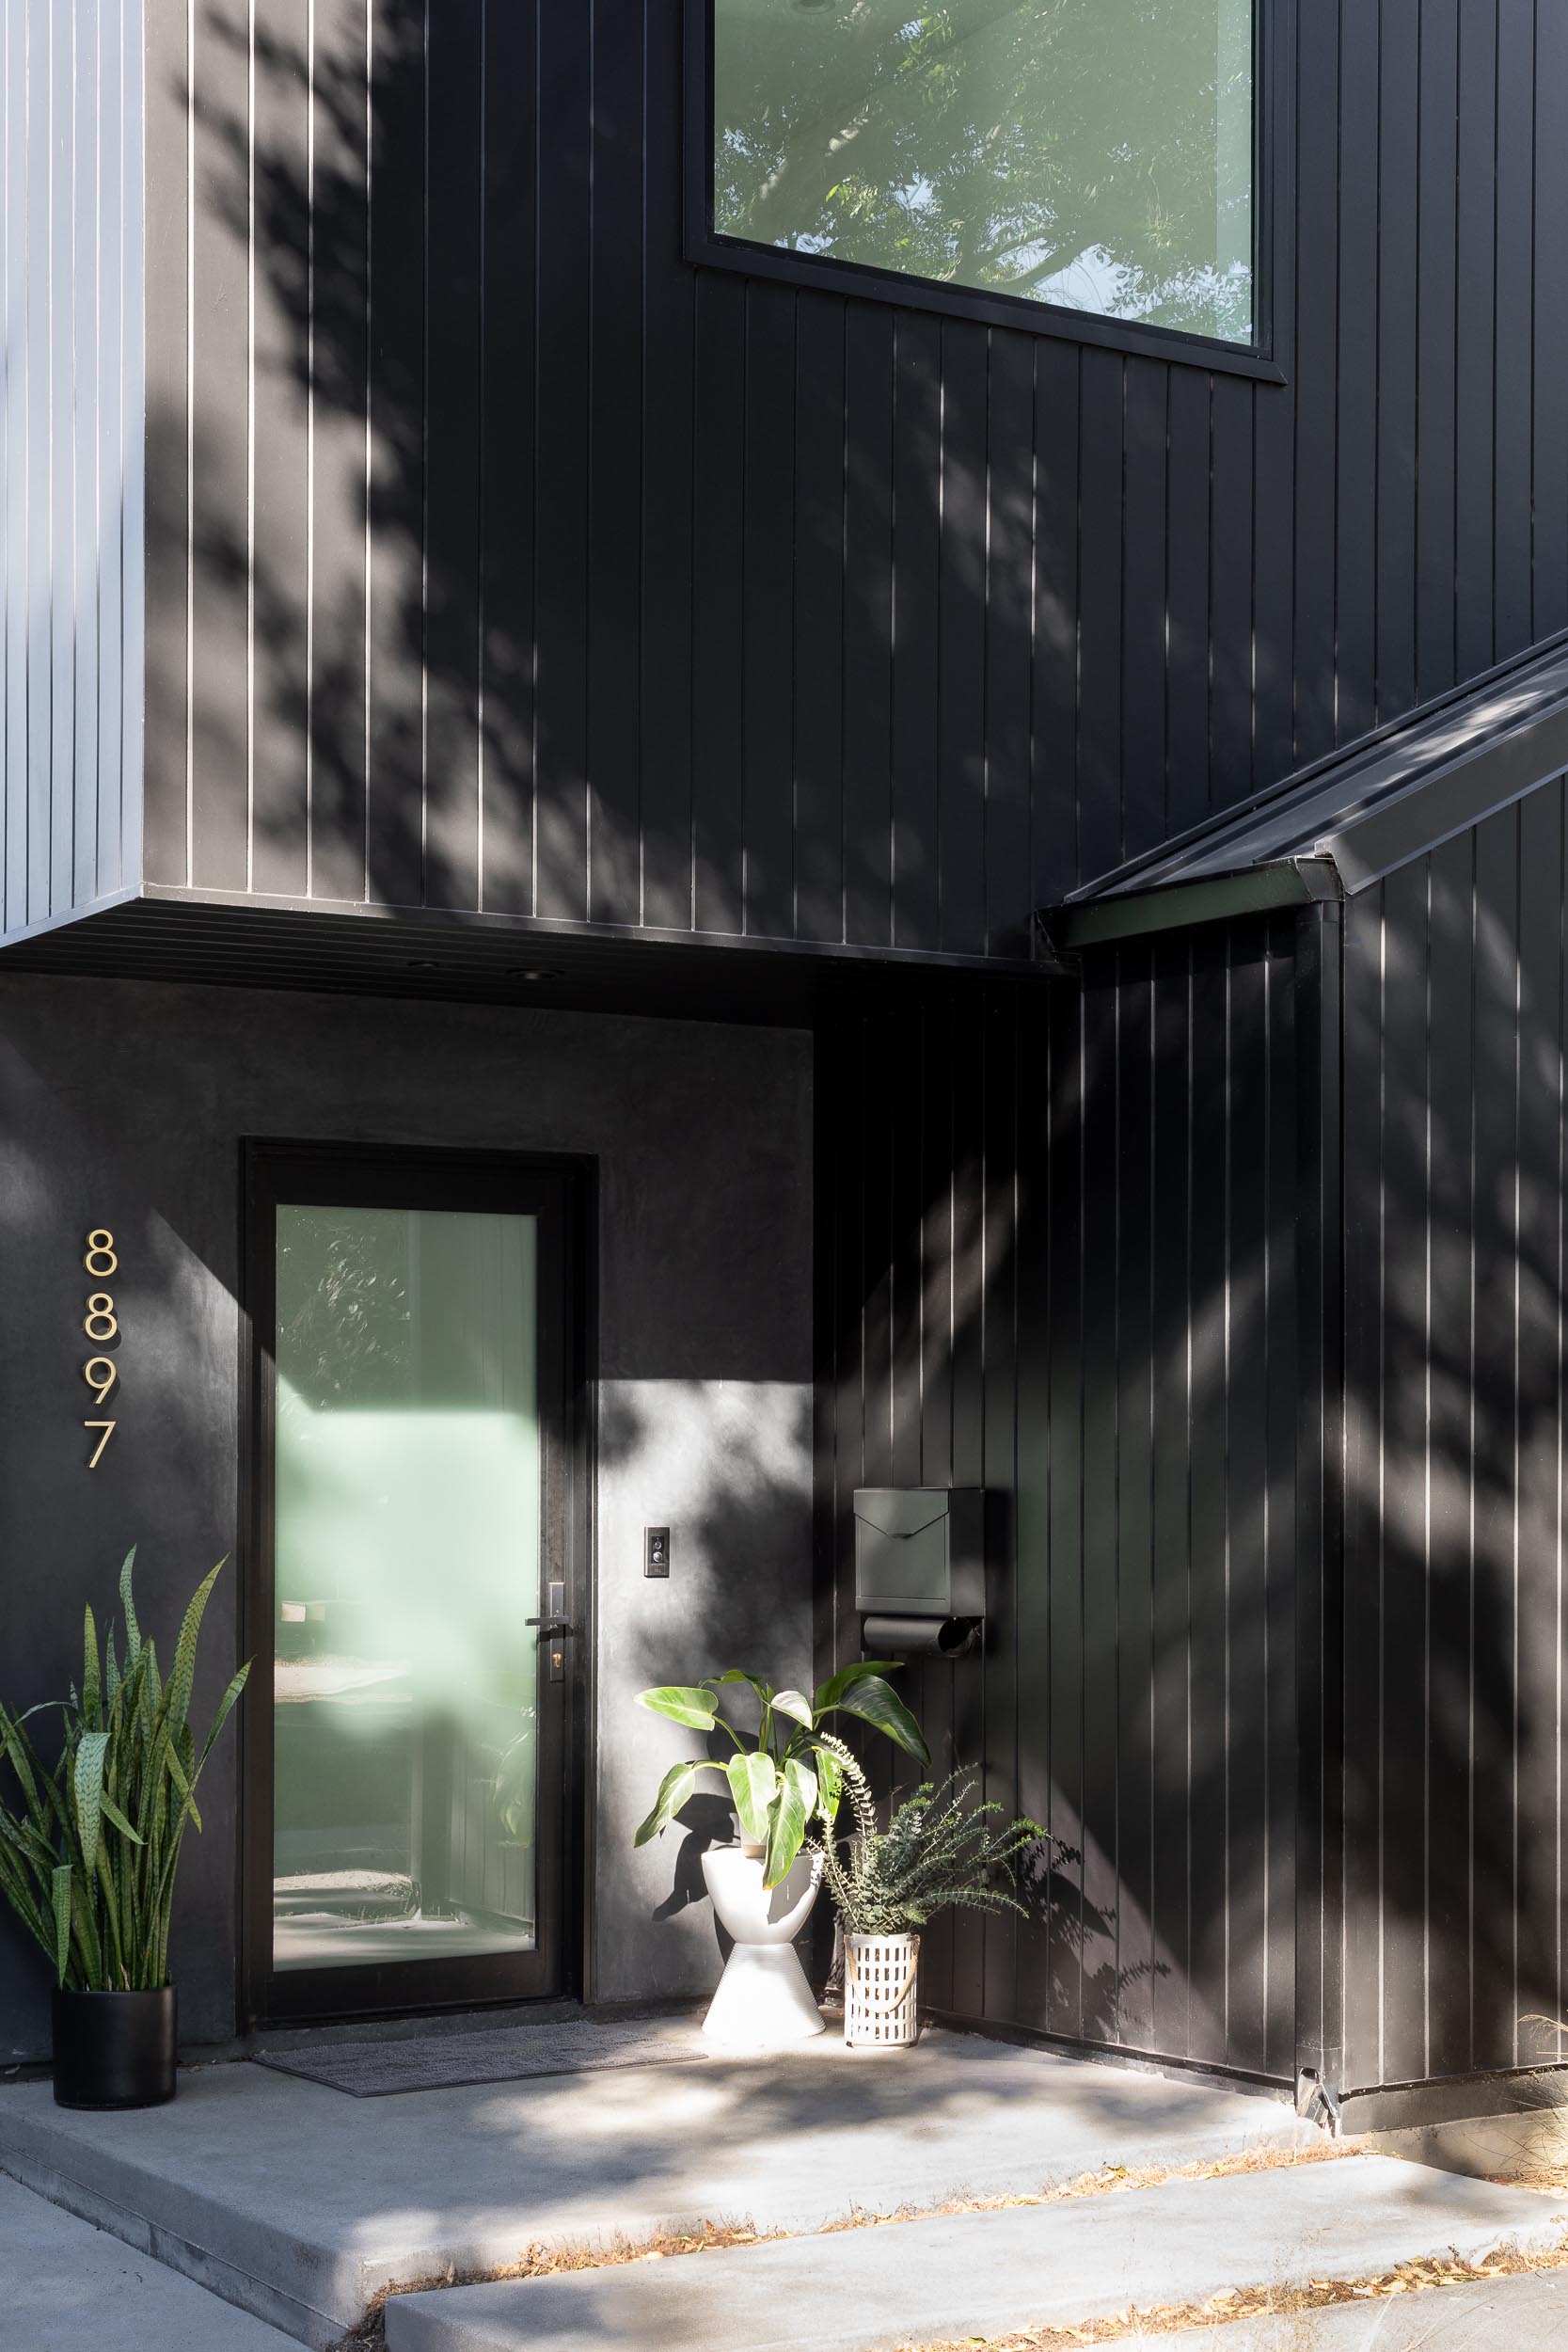 The dark and moody black exterior of this modern home was inspired by Japanese traditions like Shou Sugi Ban, while the design of the home evokes the familiar footprint of a traditional barn.